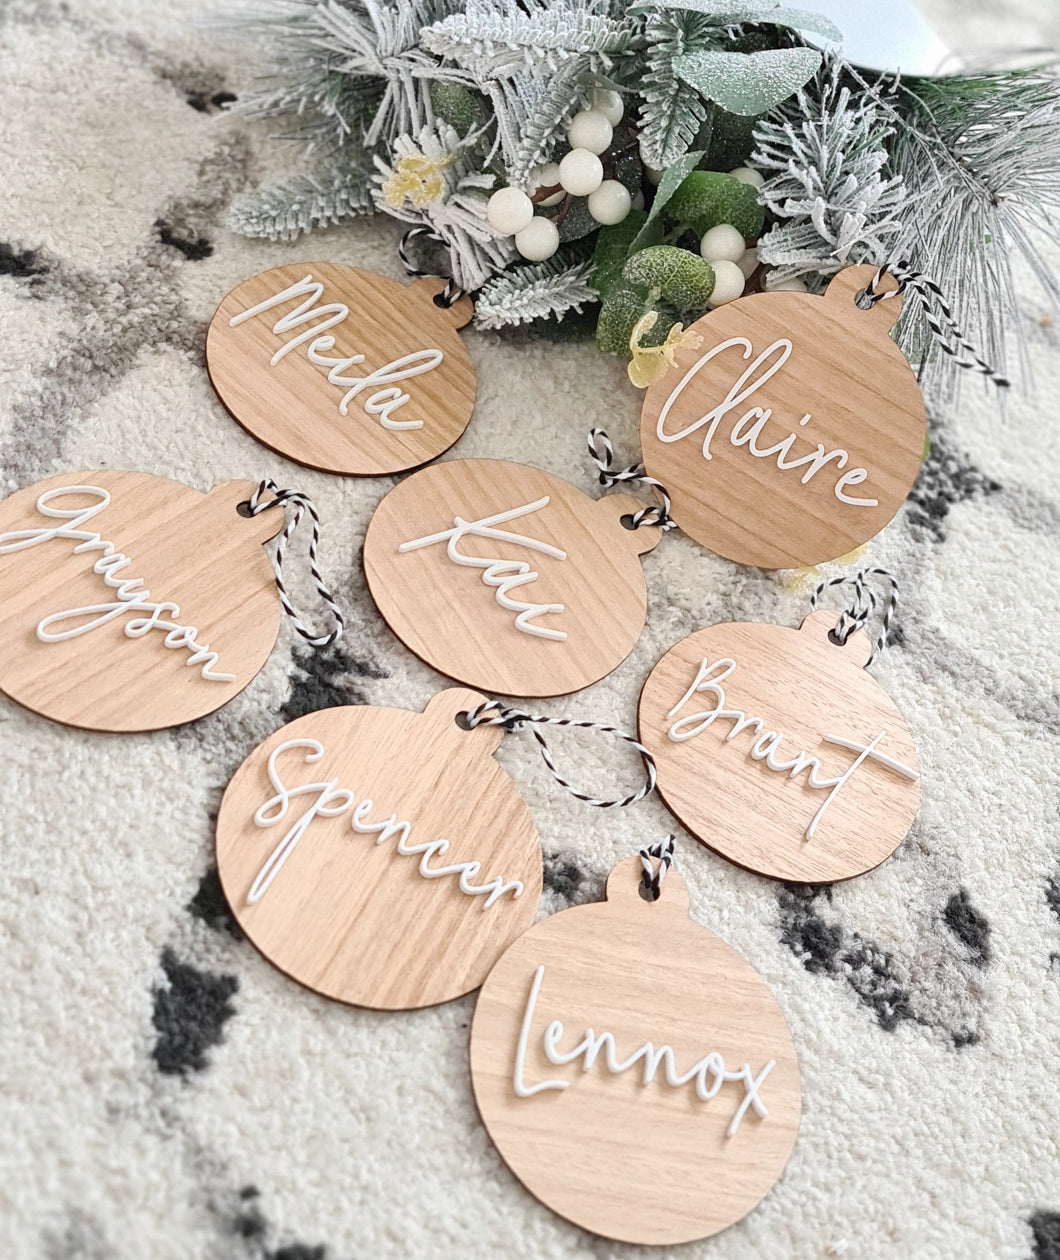 Wooden Christmas Bauble with acrylic script